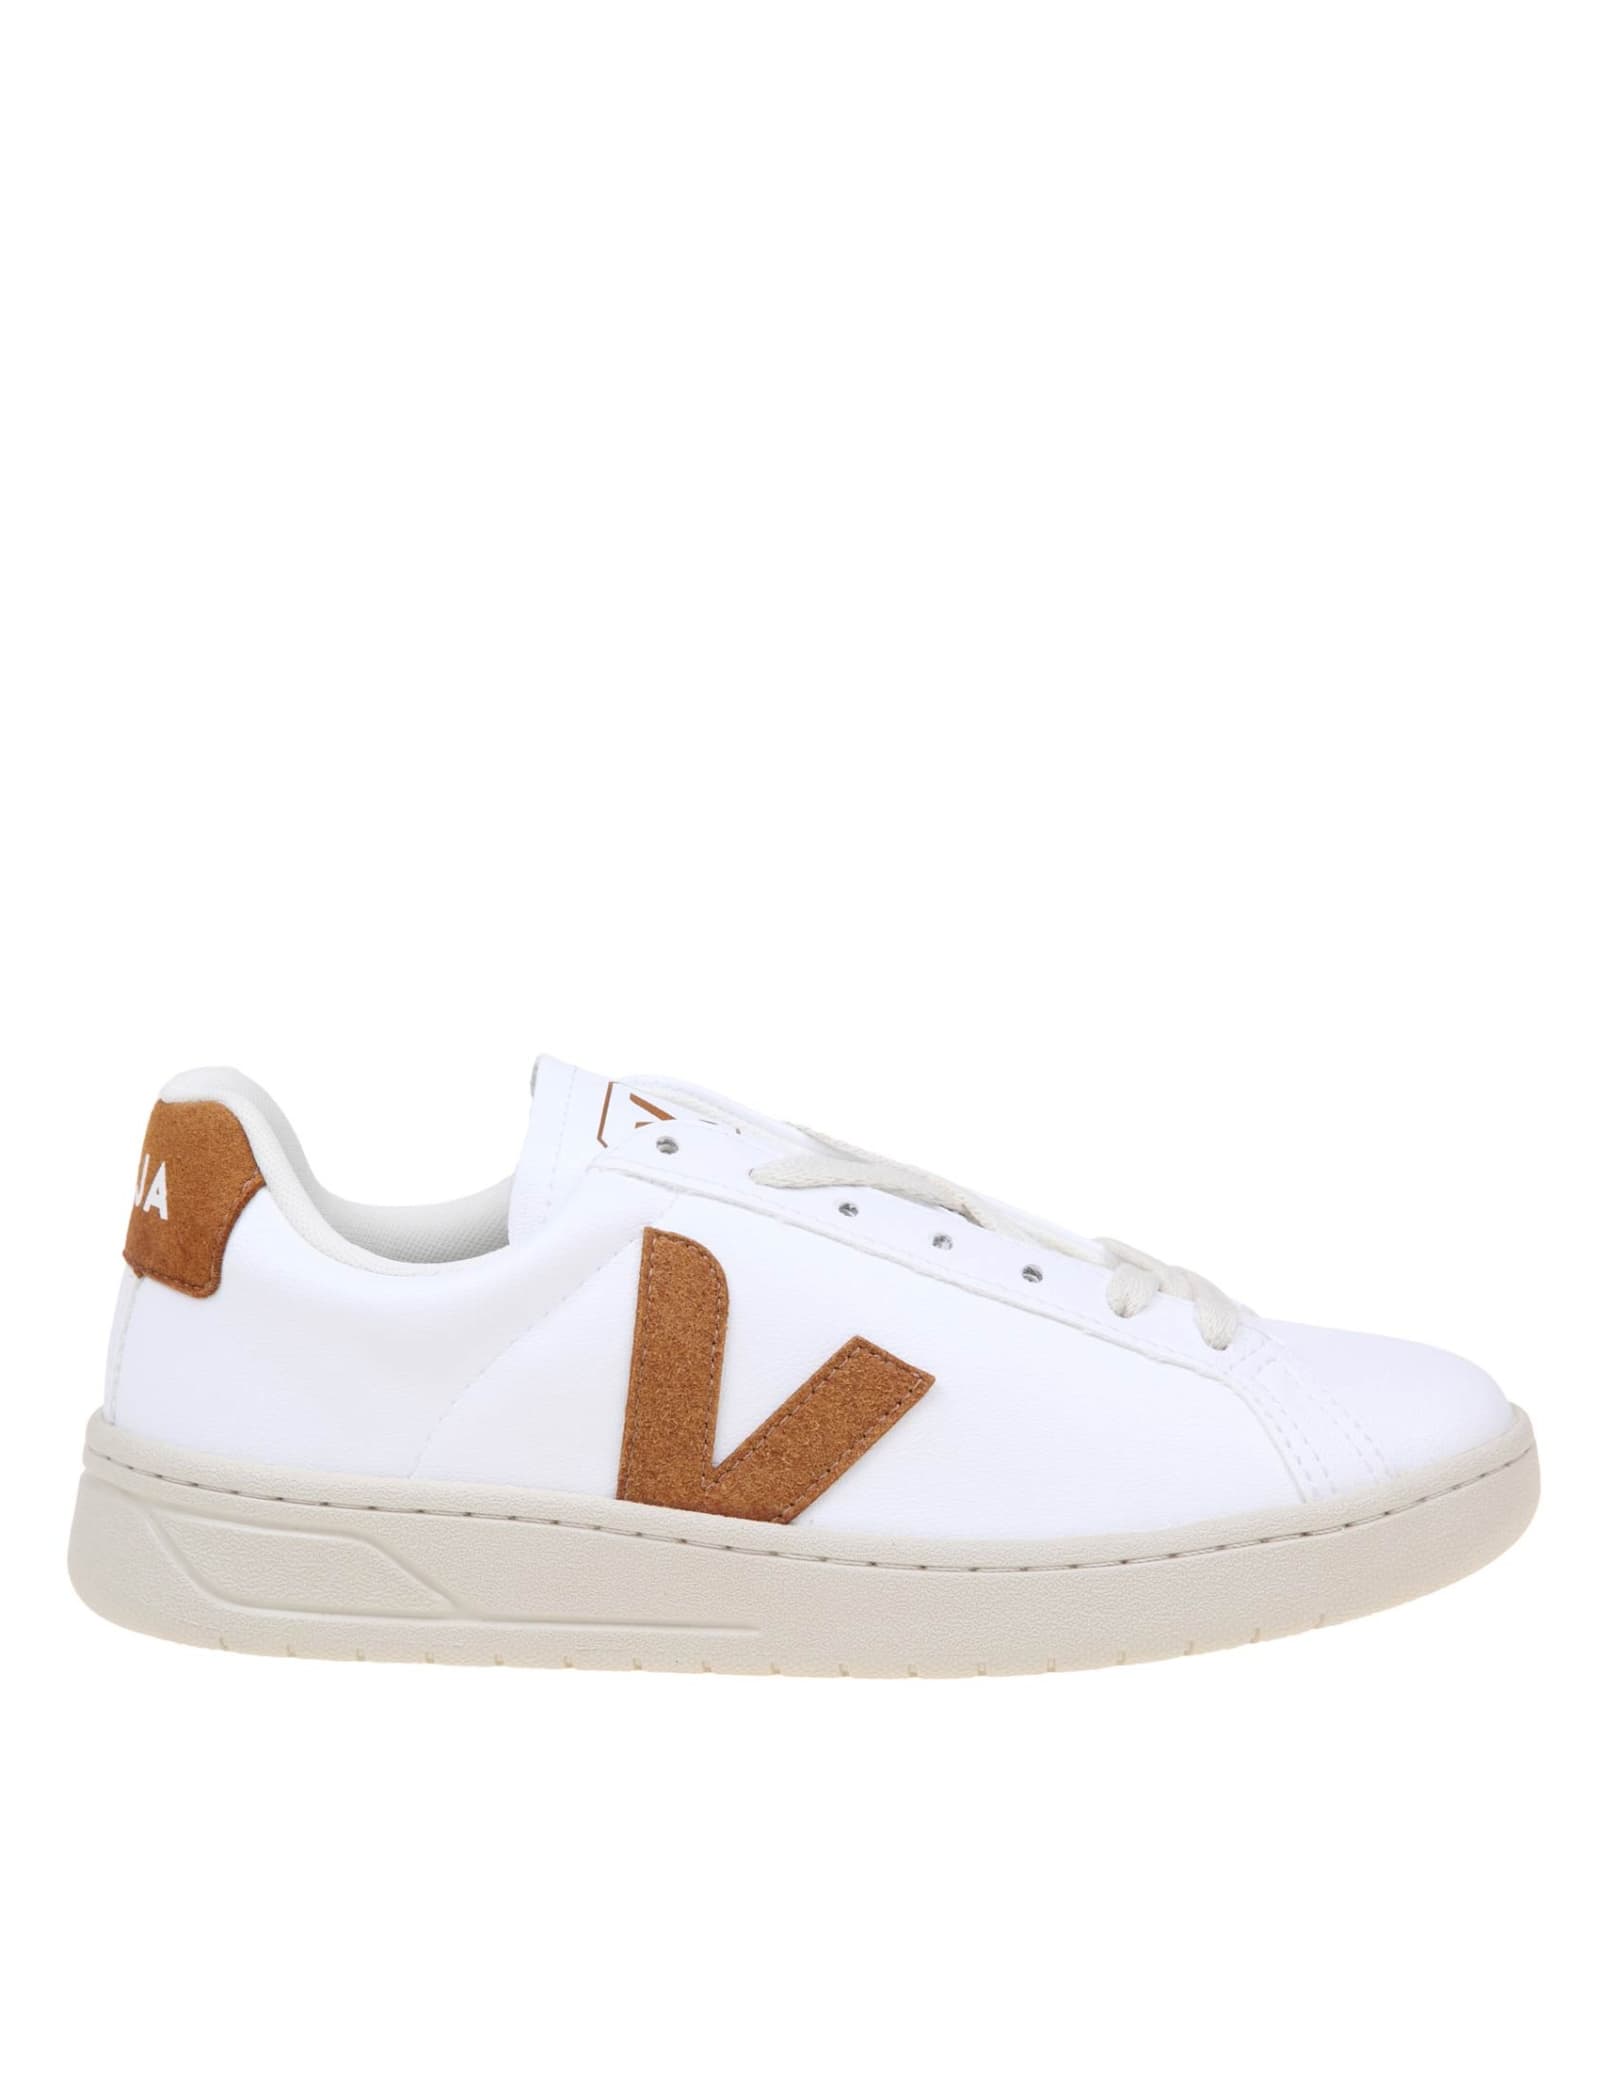 VEJA URCA SNEAKERS IN WHITE AND CAMEL LEATHER AND SUEDE